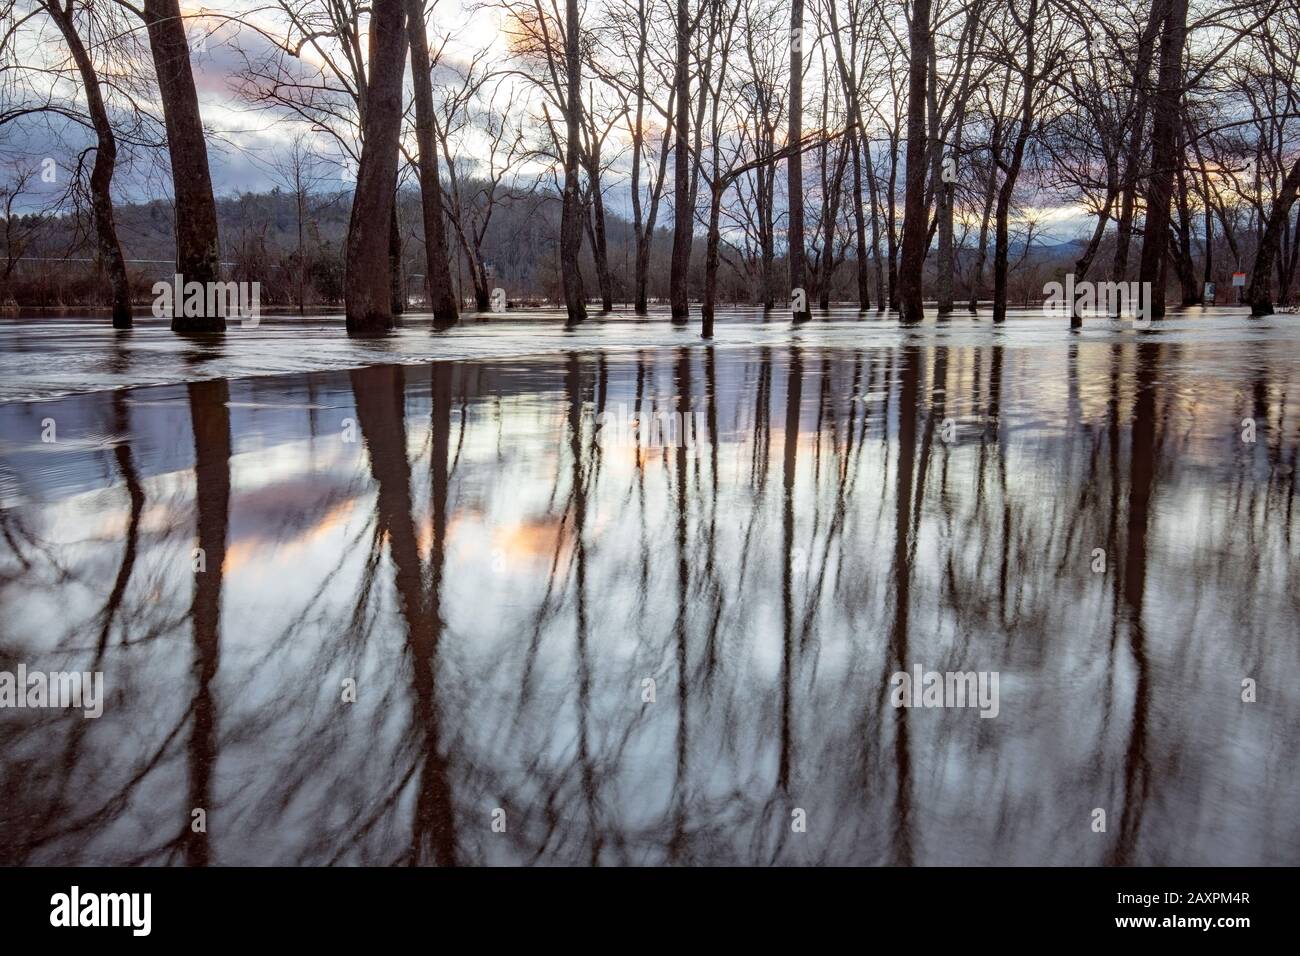 Flooded forest reflections at sunset created by the French Broad River overflowing its banks after heavy rains. Hap Simpson Park, Brevard, North Carol Stock Photo